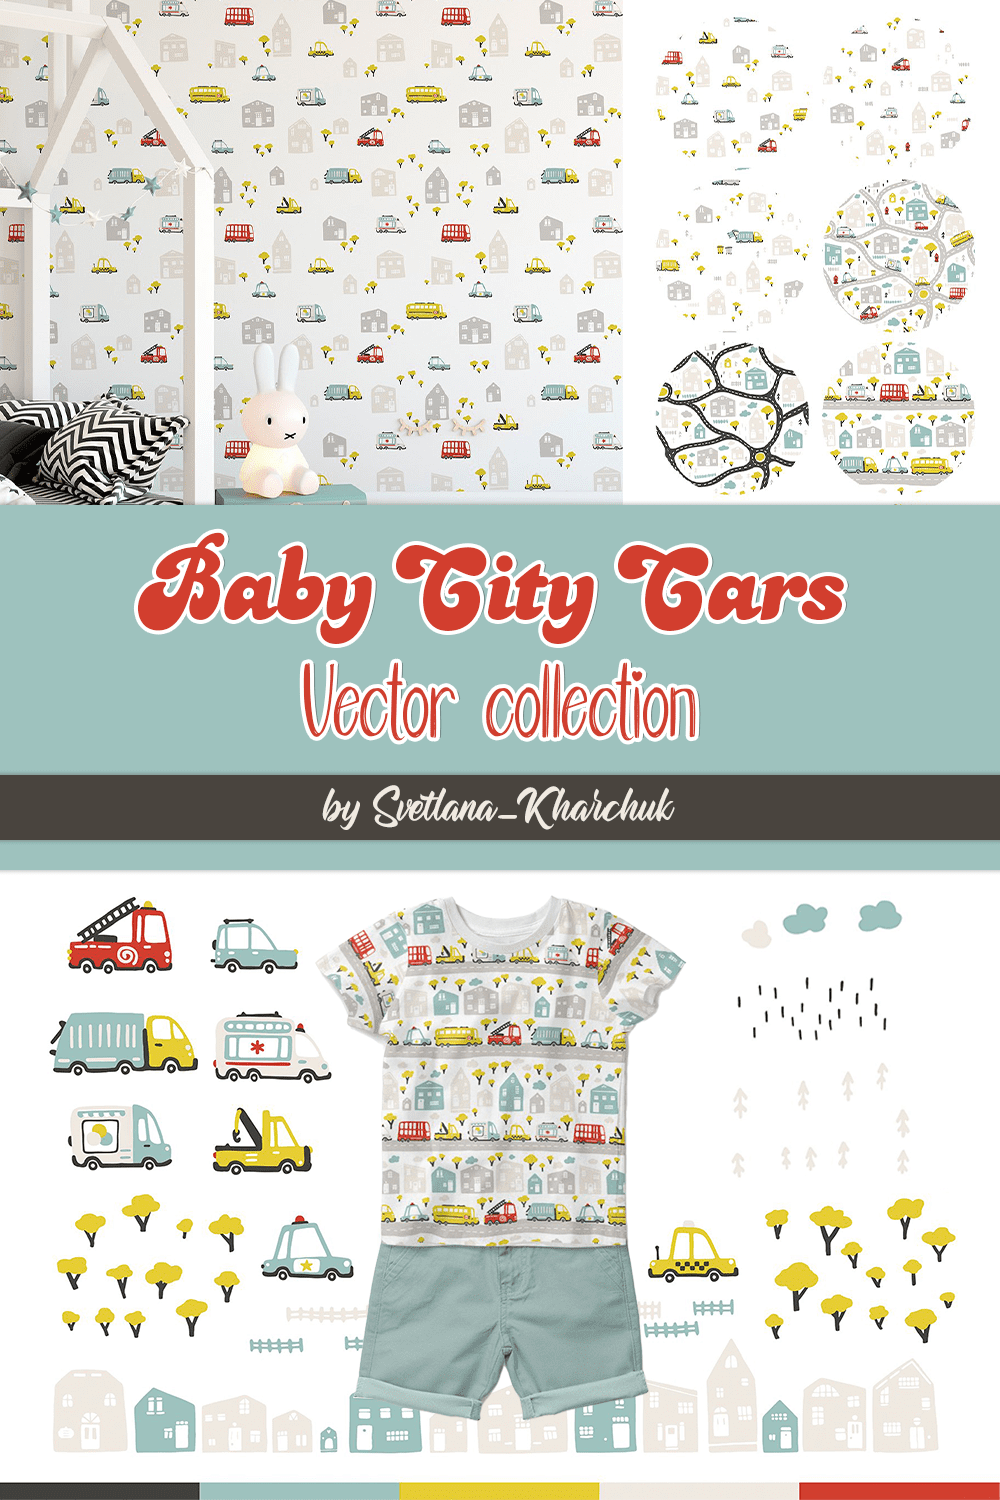 baby city cars. vector collection pinterest